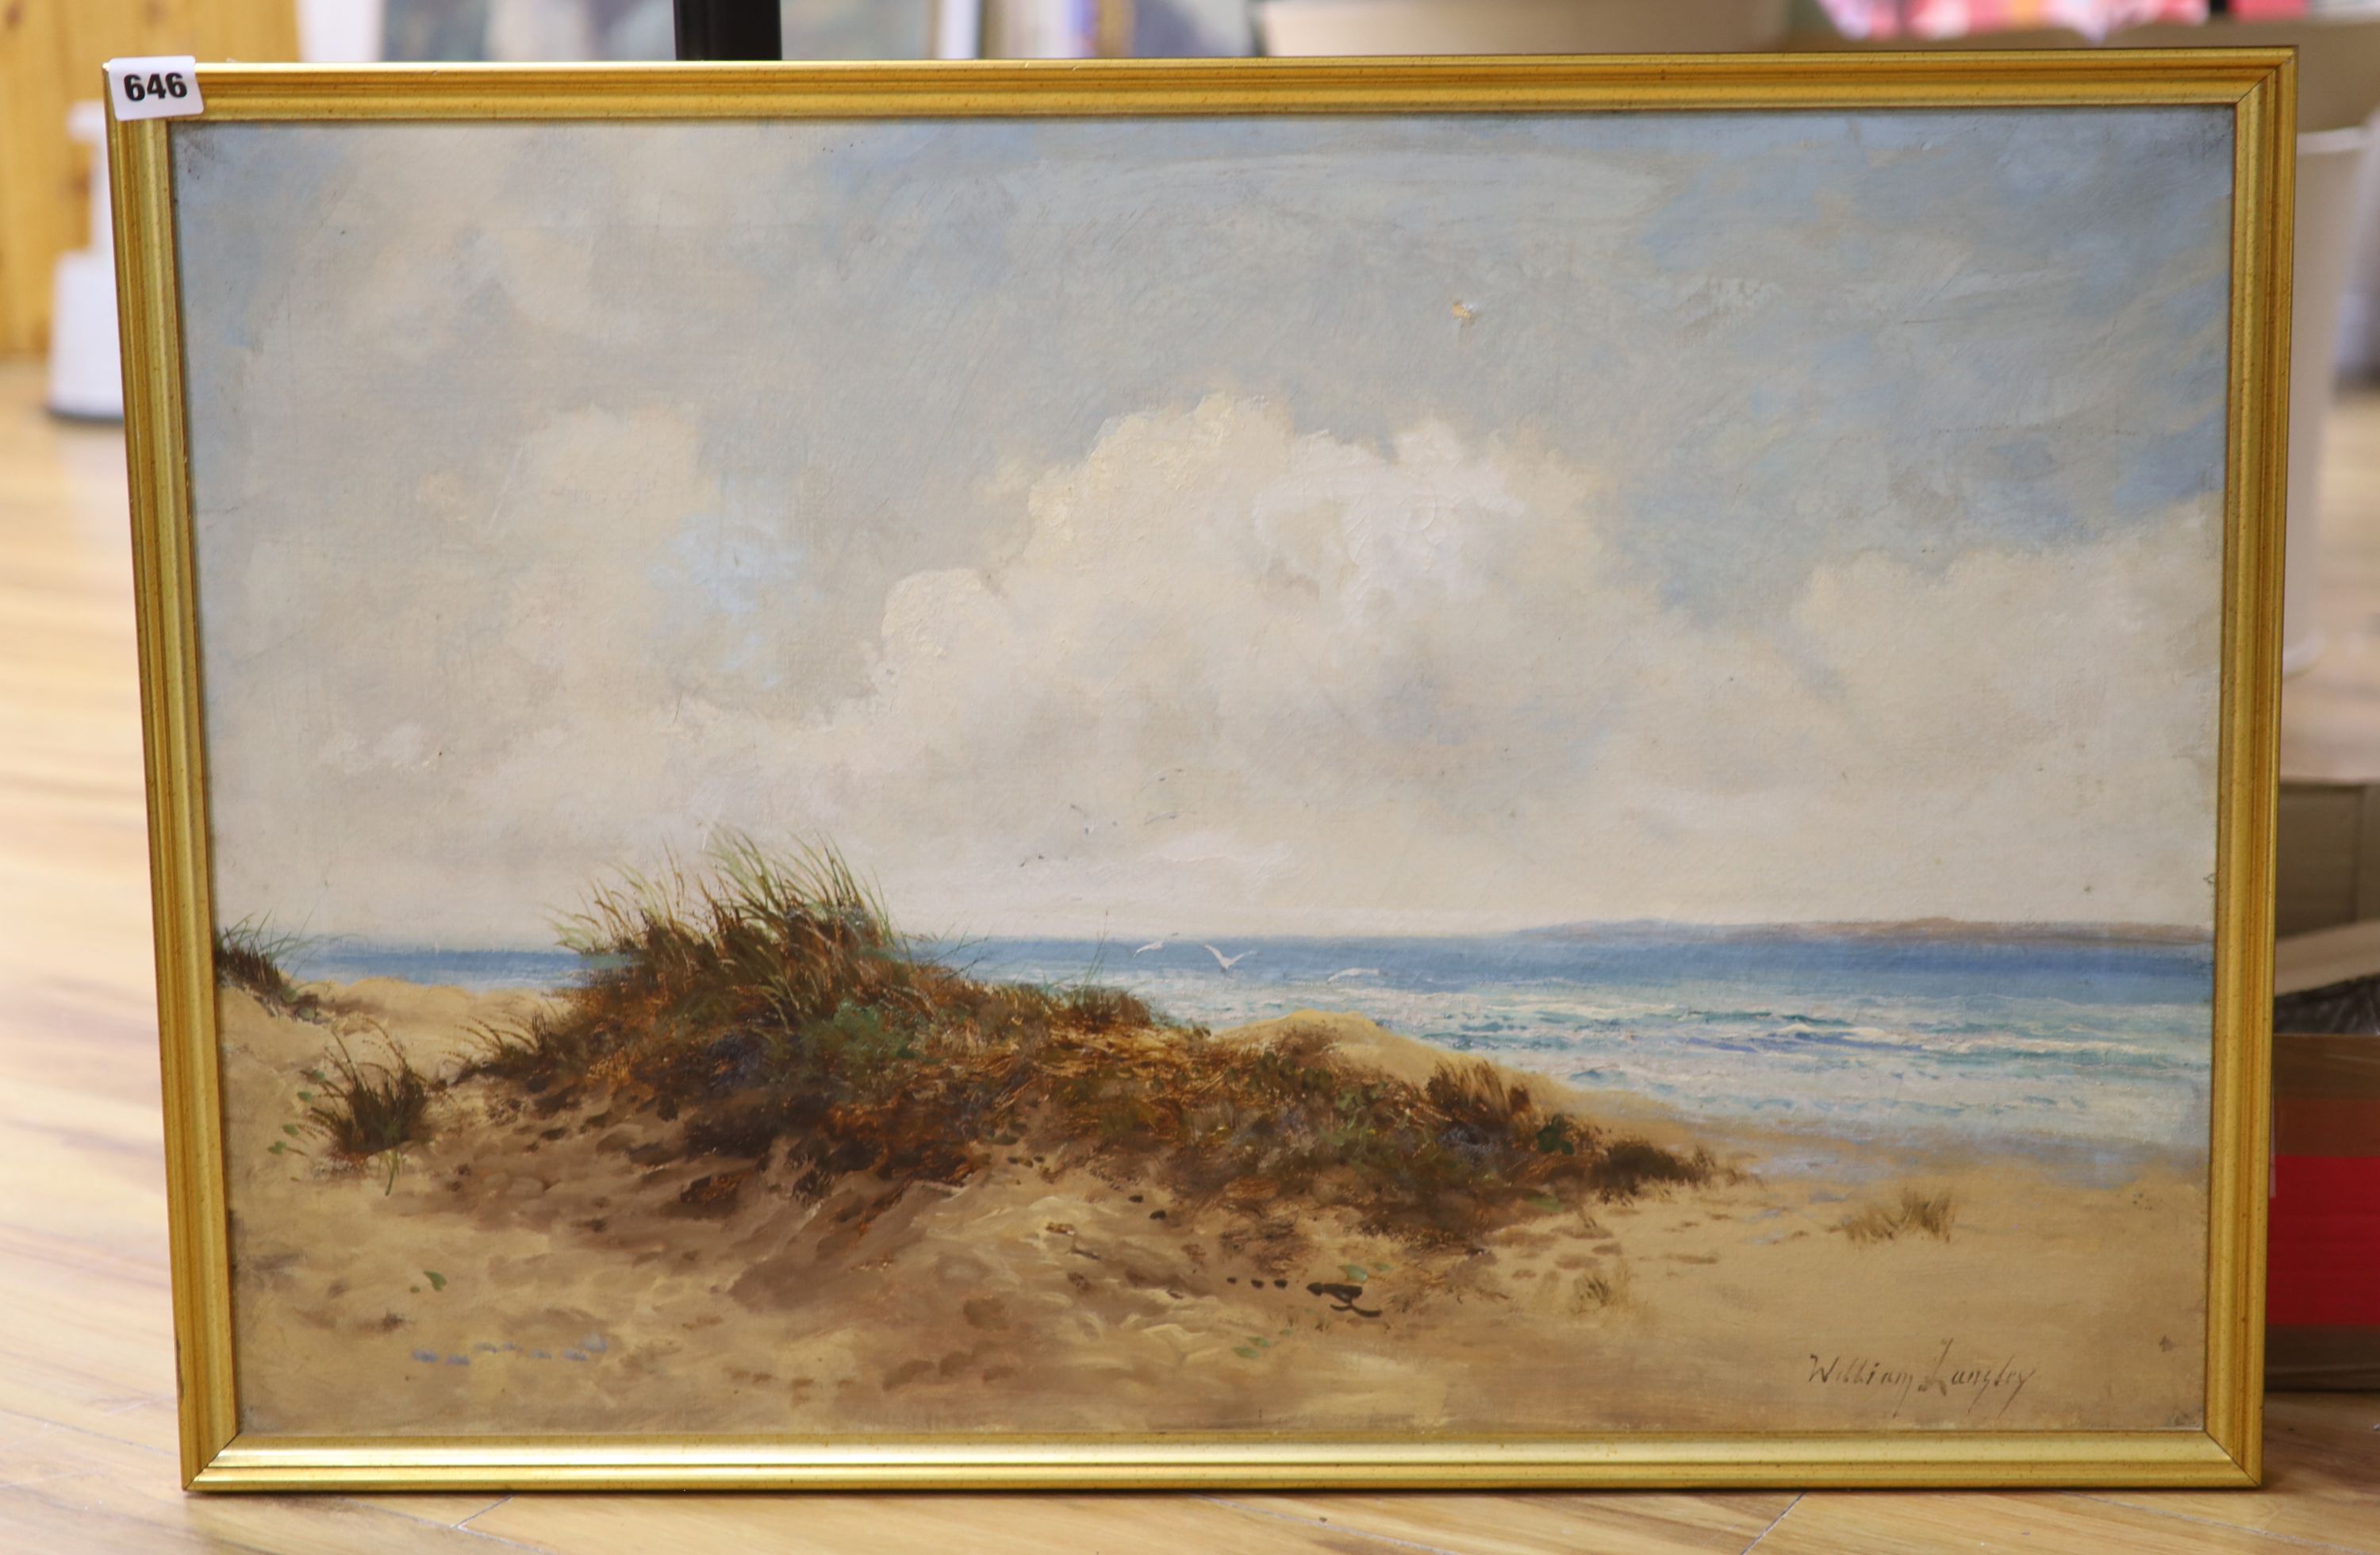 William Langley (1852-1922), oil on canvas, Sand dunes along the coast, signed, 50 x 75cm